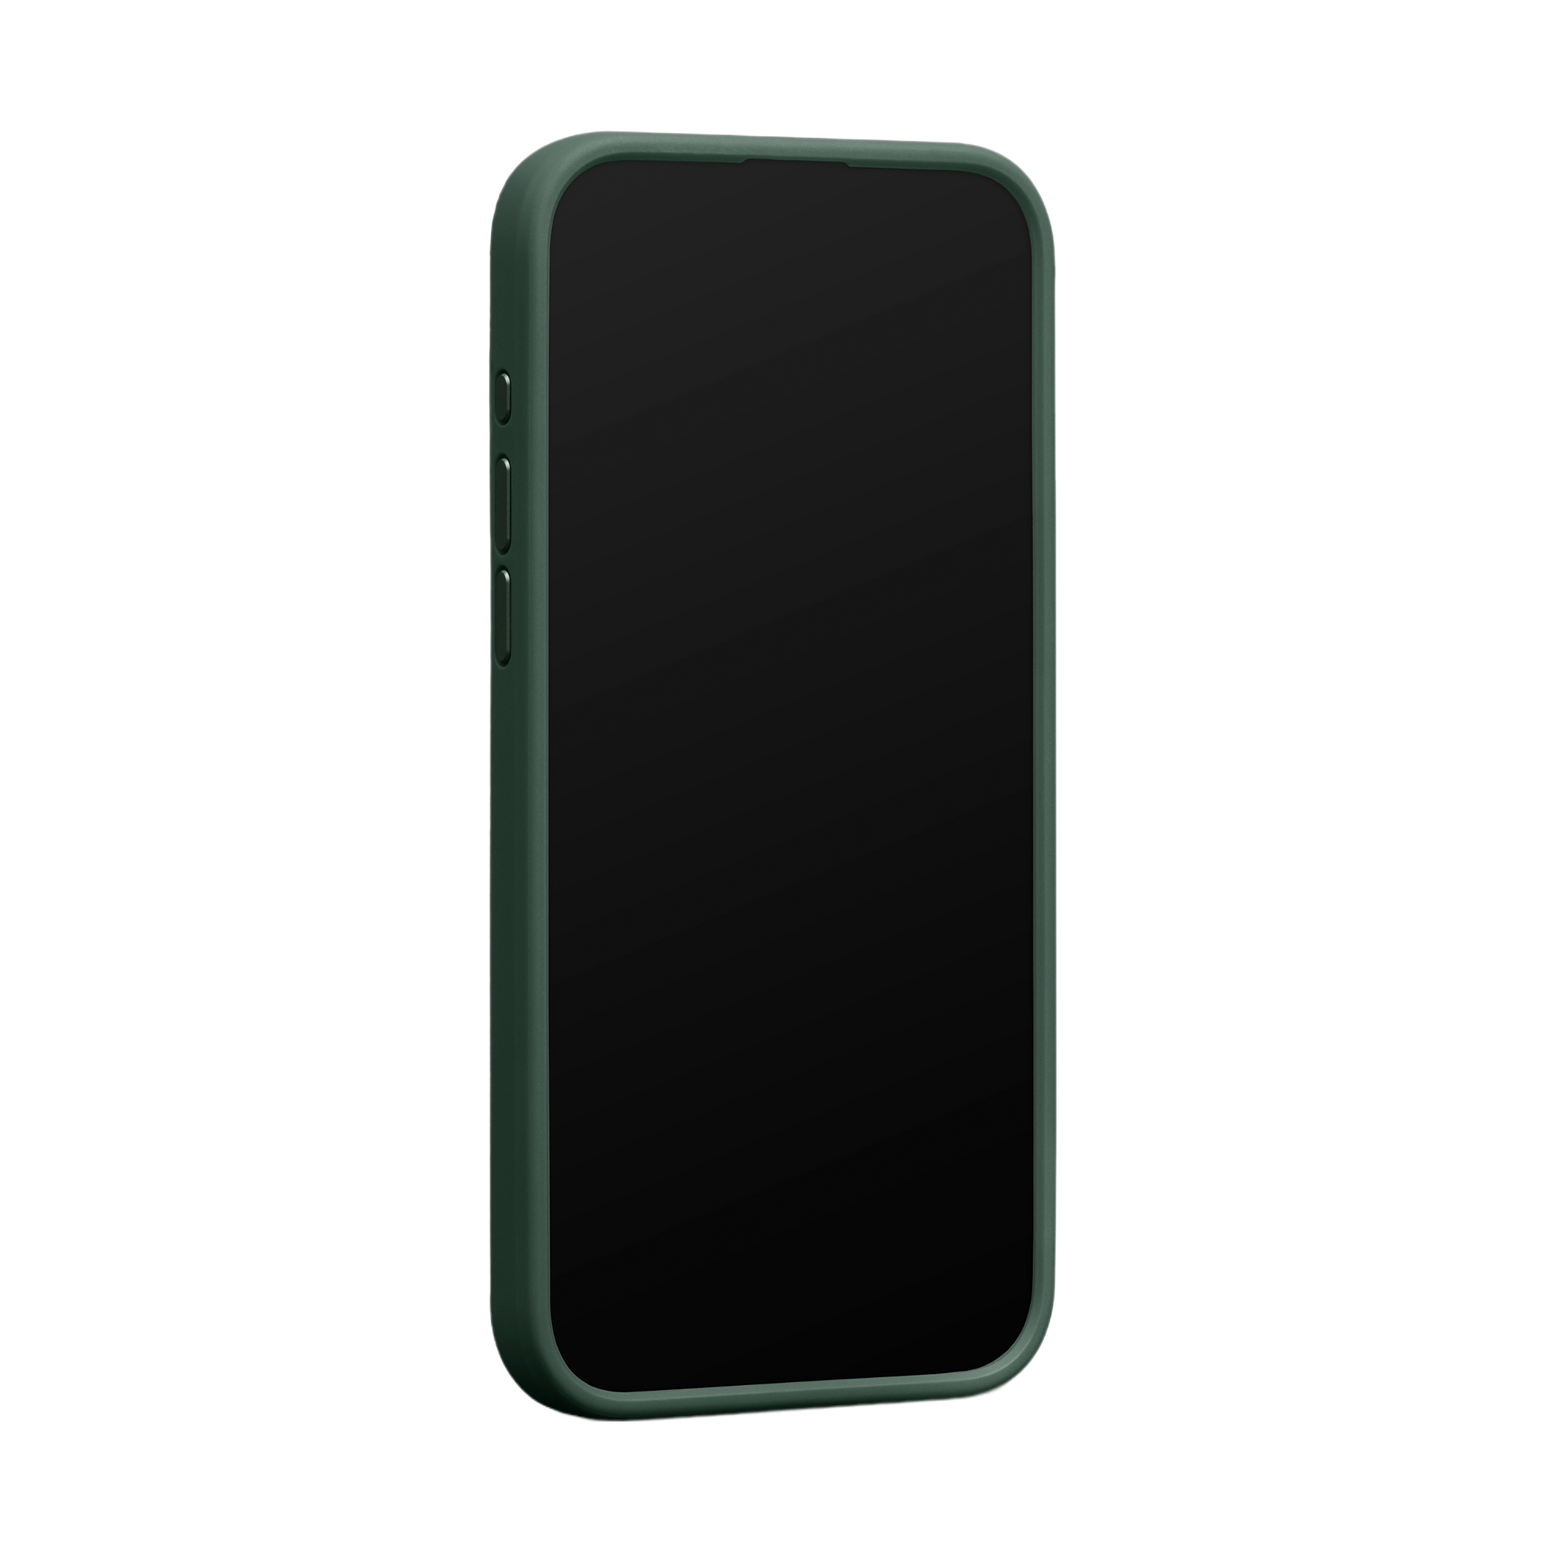 WOOLNUT Leather Case for iPhone 15 Pro Max - Green